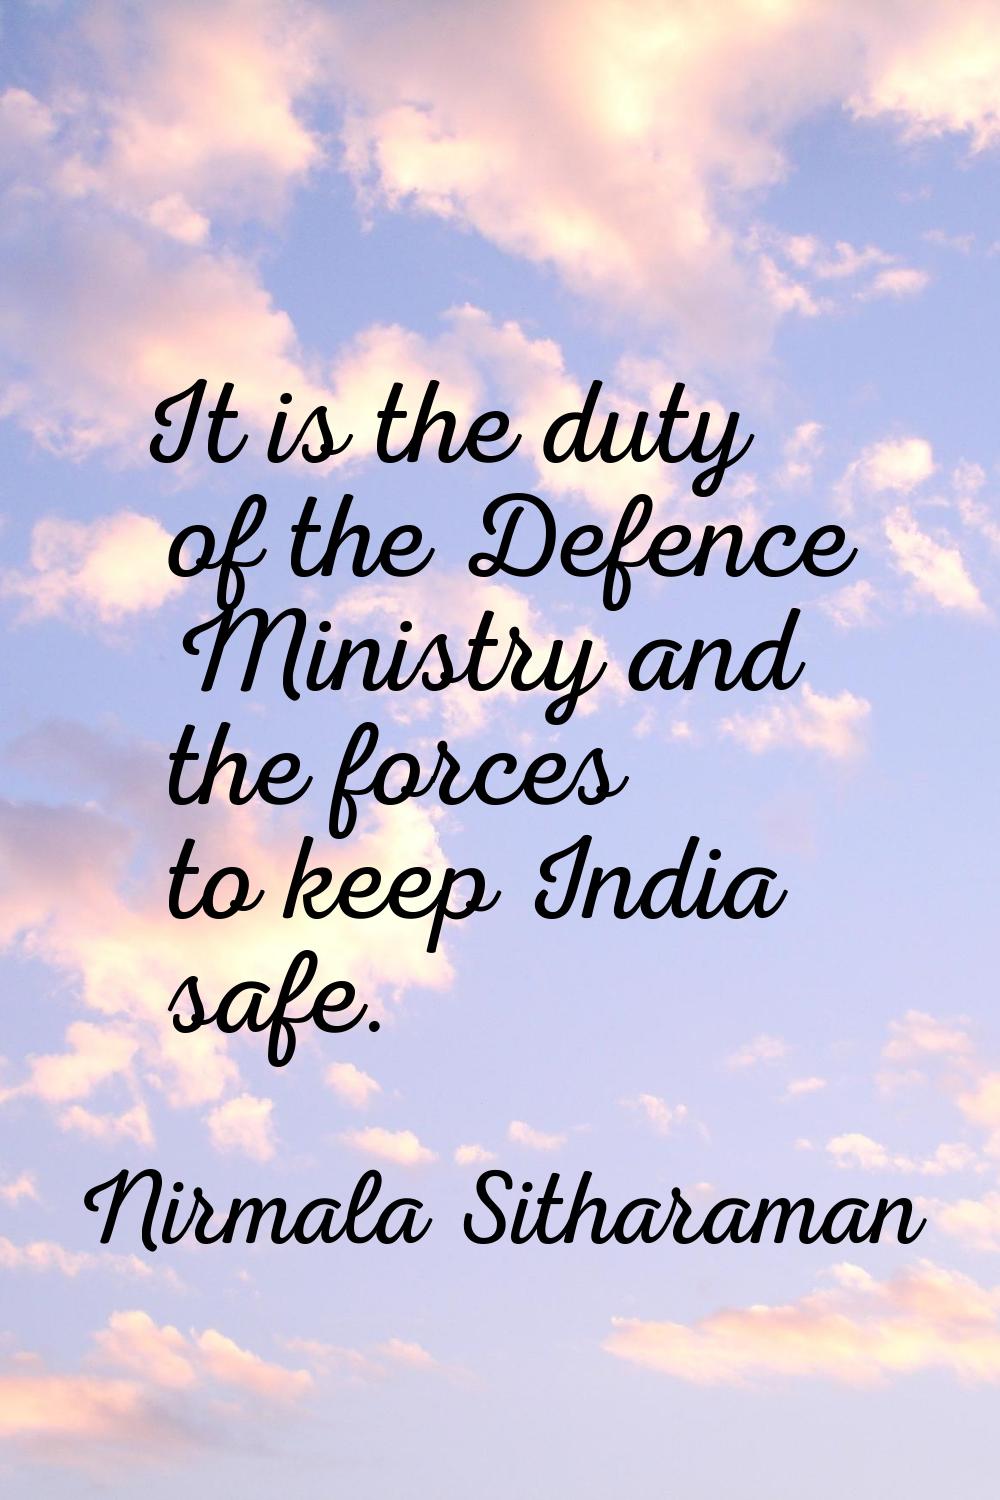 It is the duty of the Defence Ministry and the forces to keep India safe.